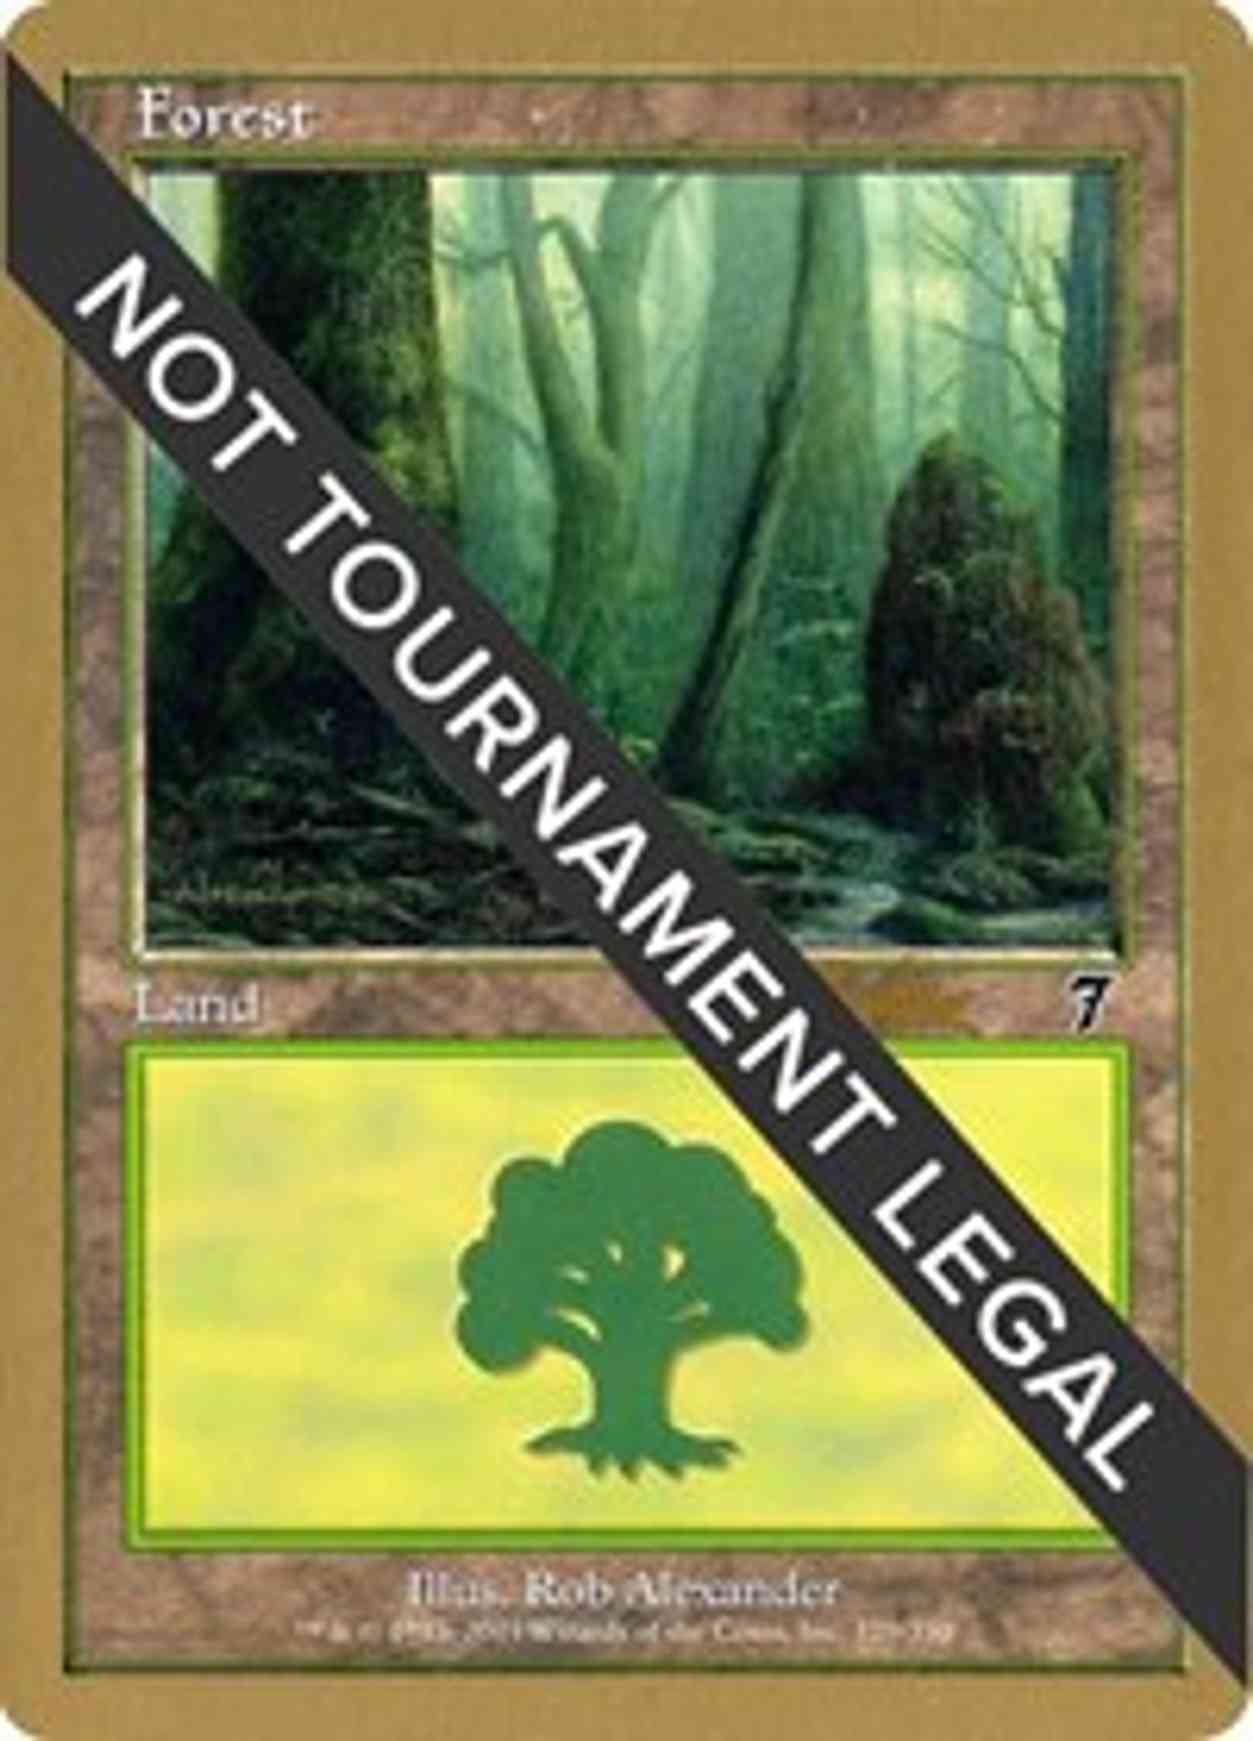 Forest (329) - 2002 Sim Han How (7ED) magic card front